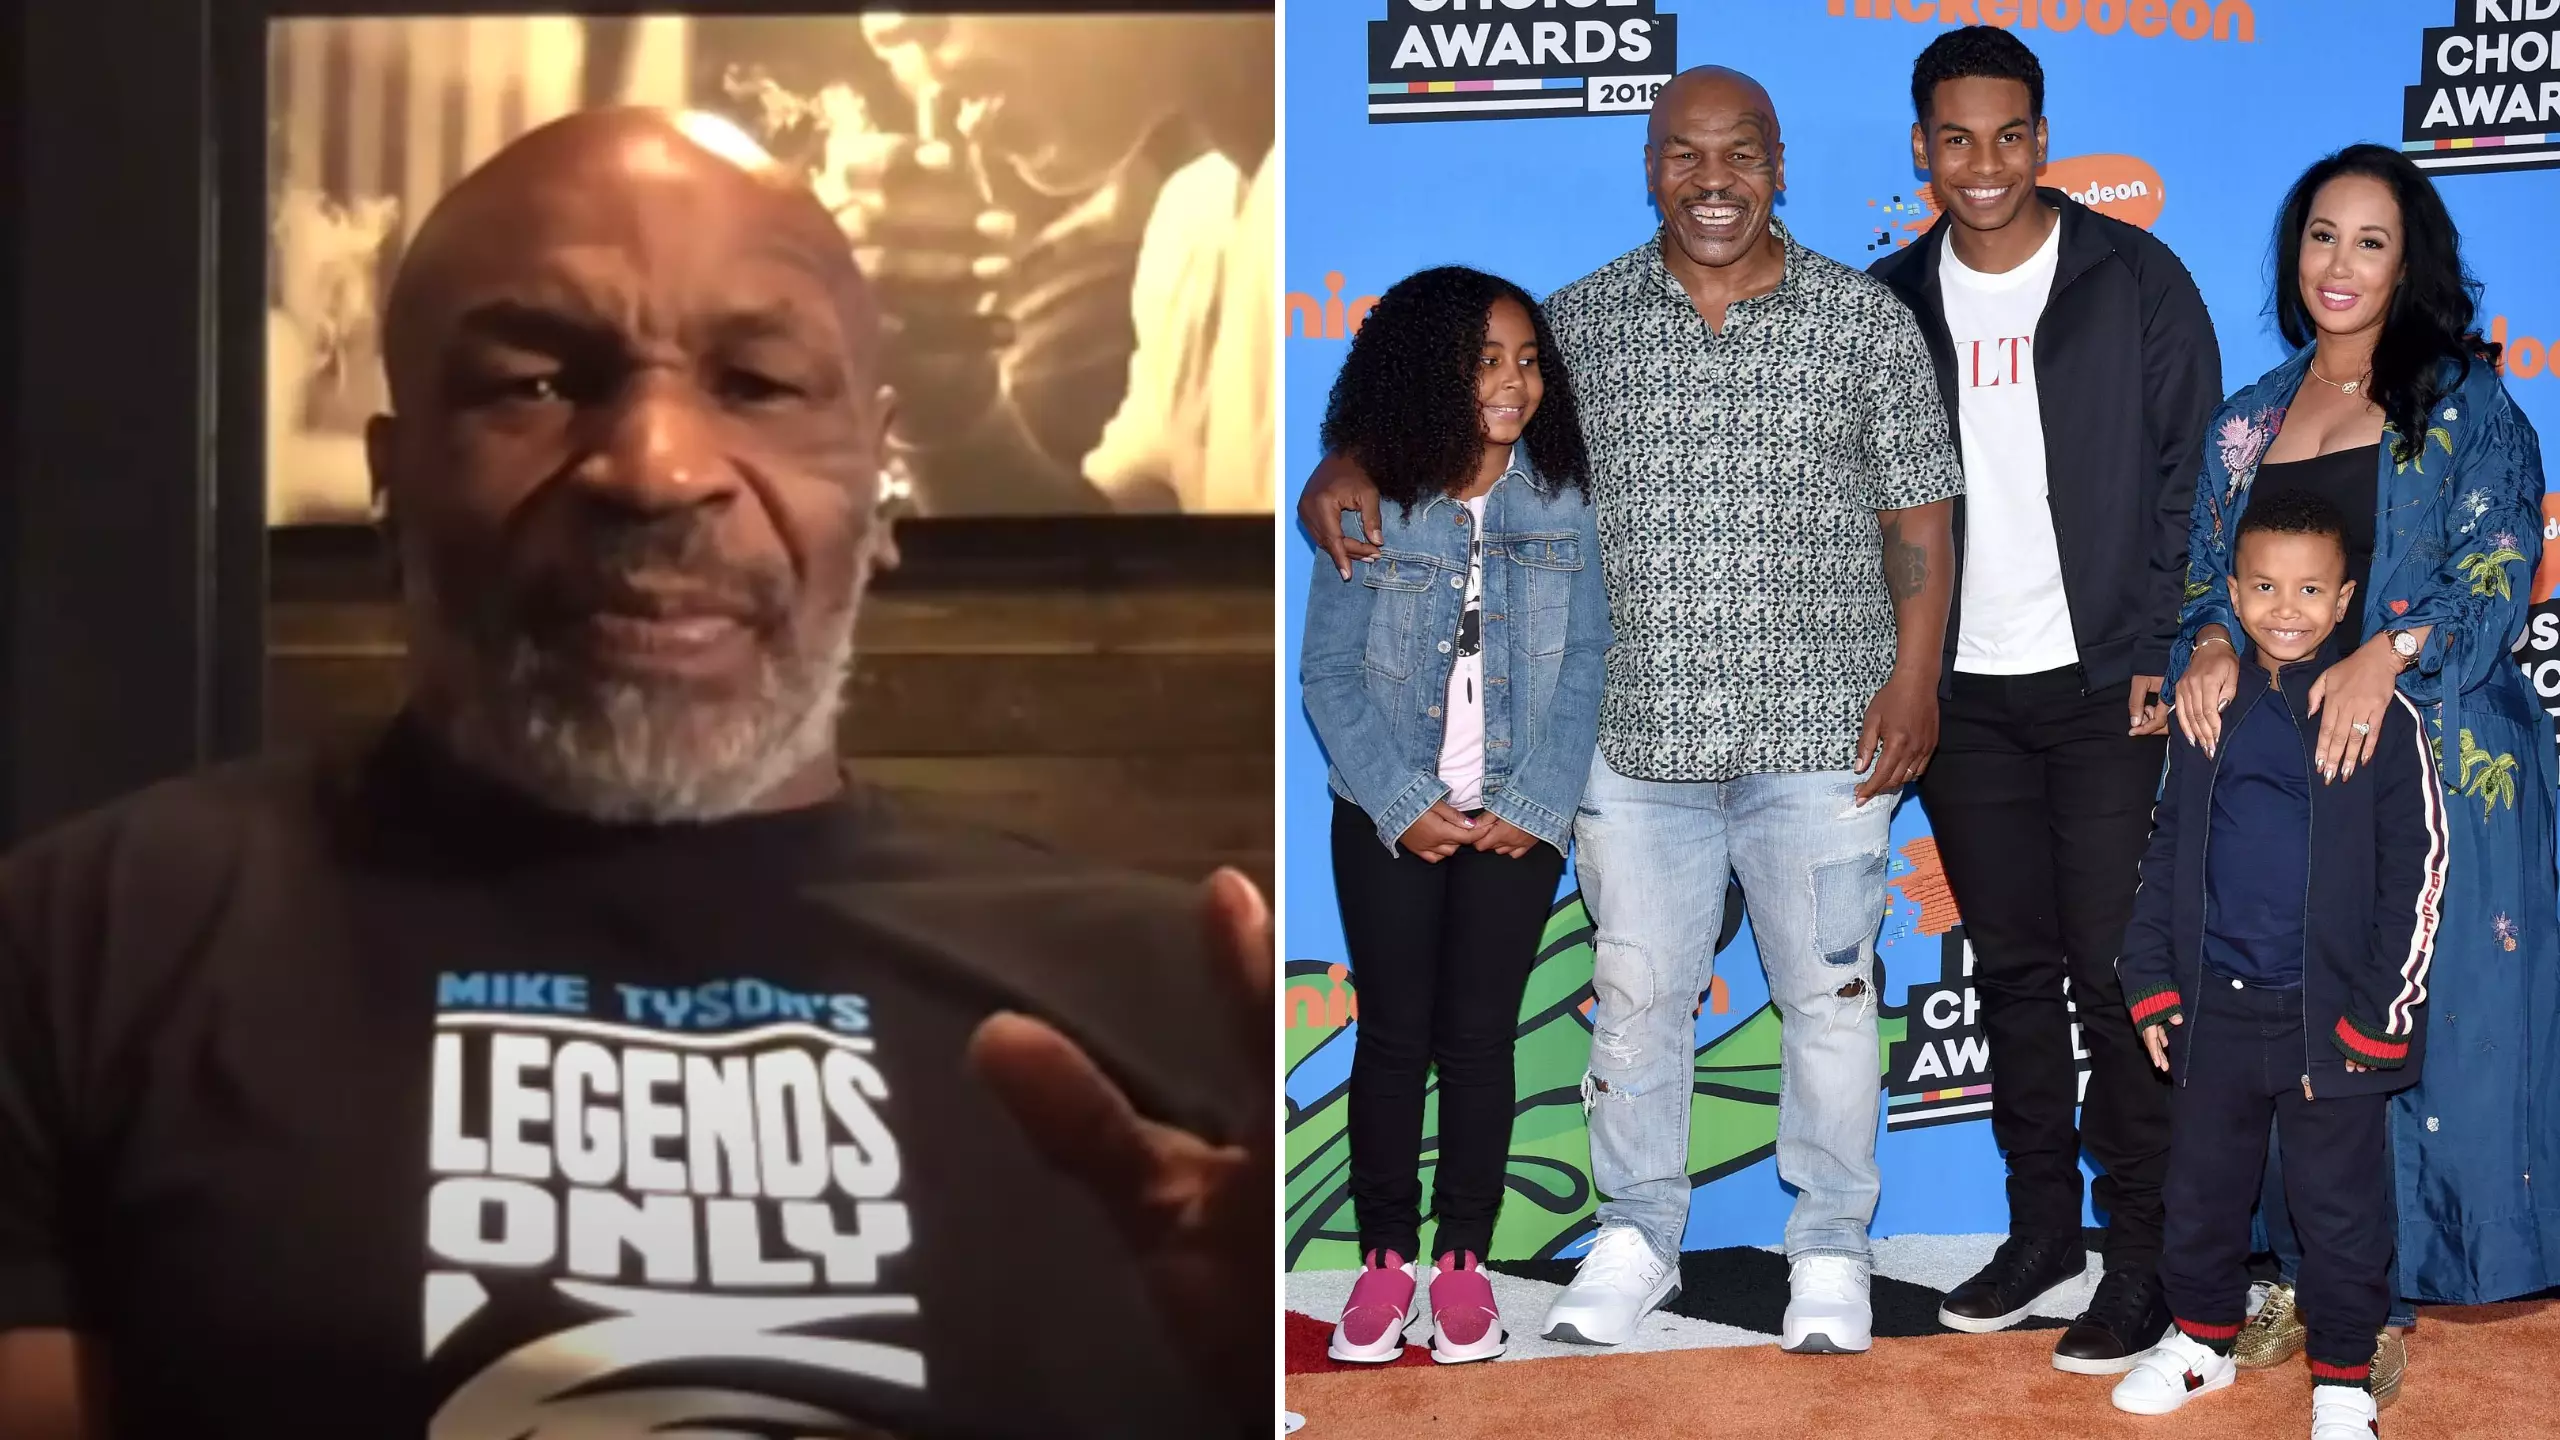 Mike Tyson's Family Had A Hilarious Response To His Boxing Comeback At 54-Years-Old